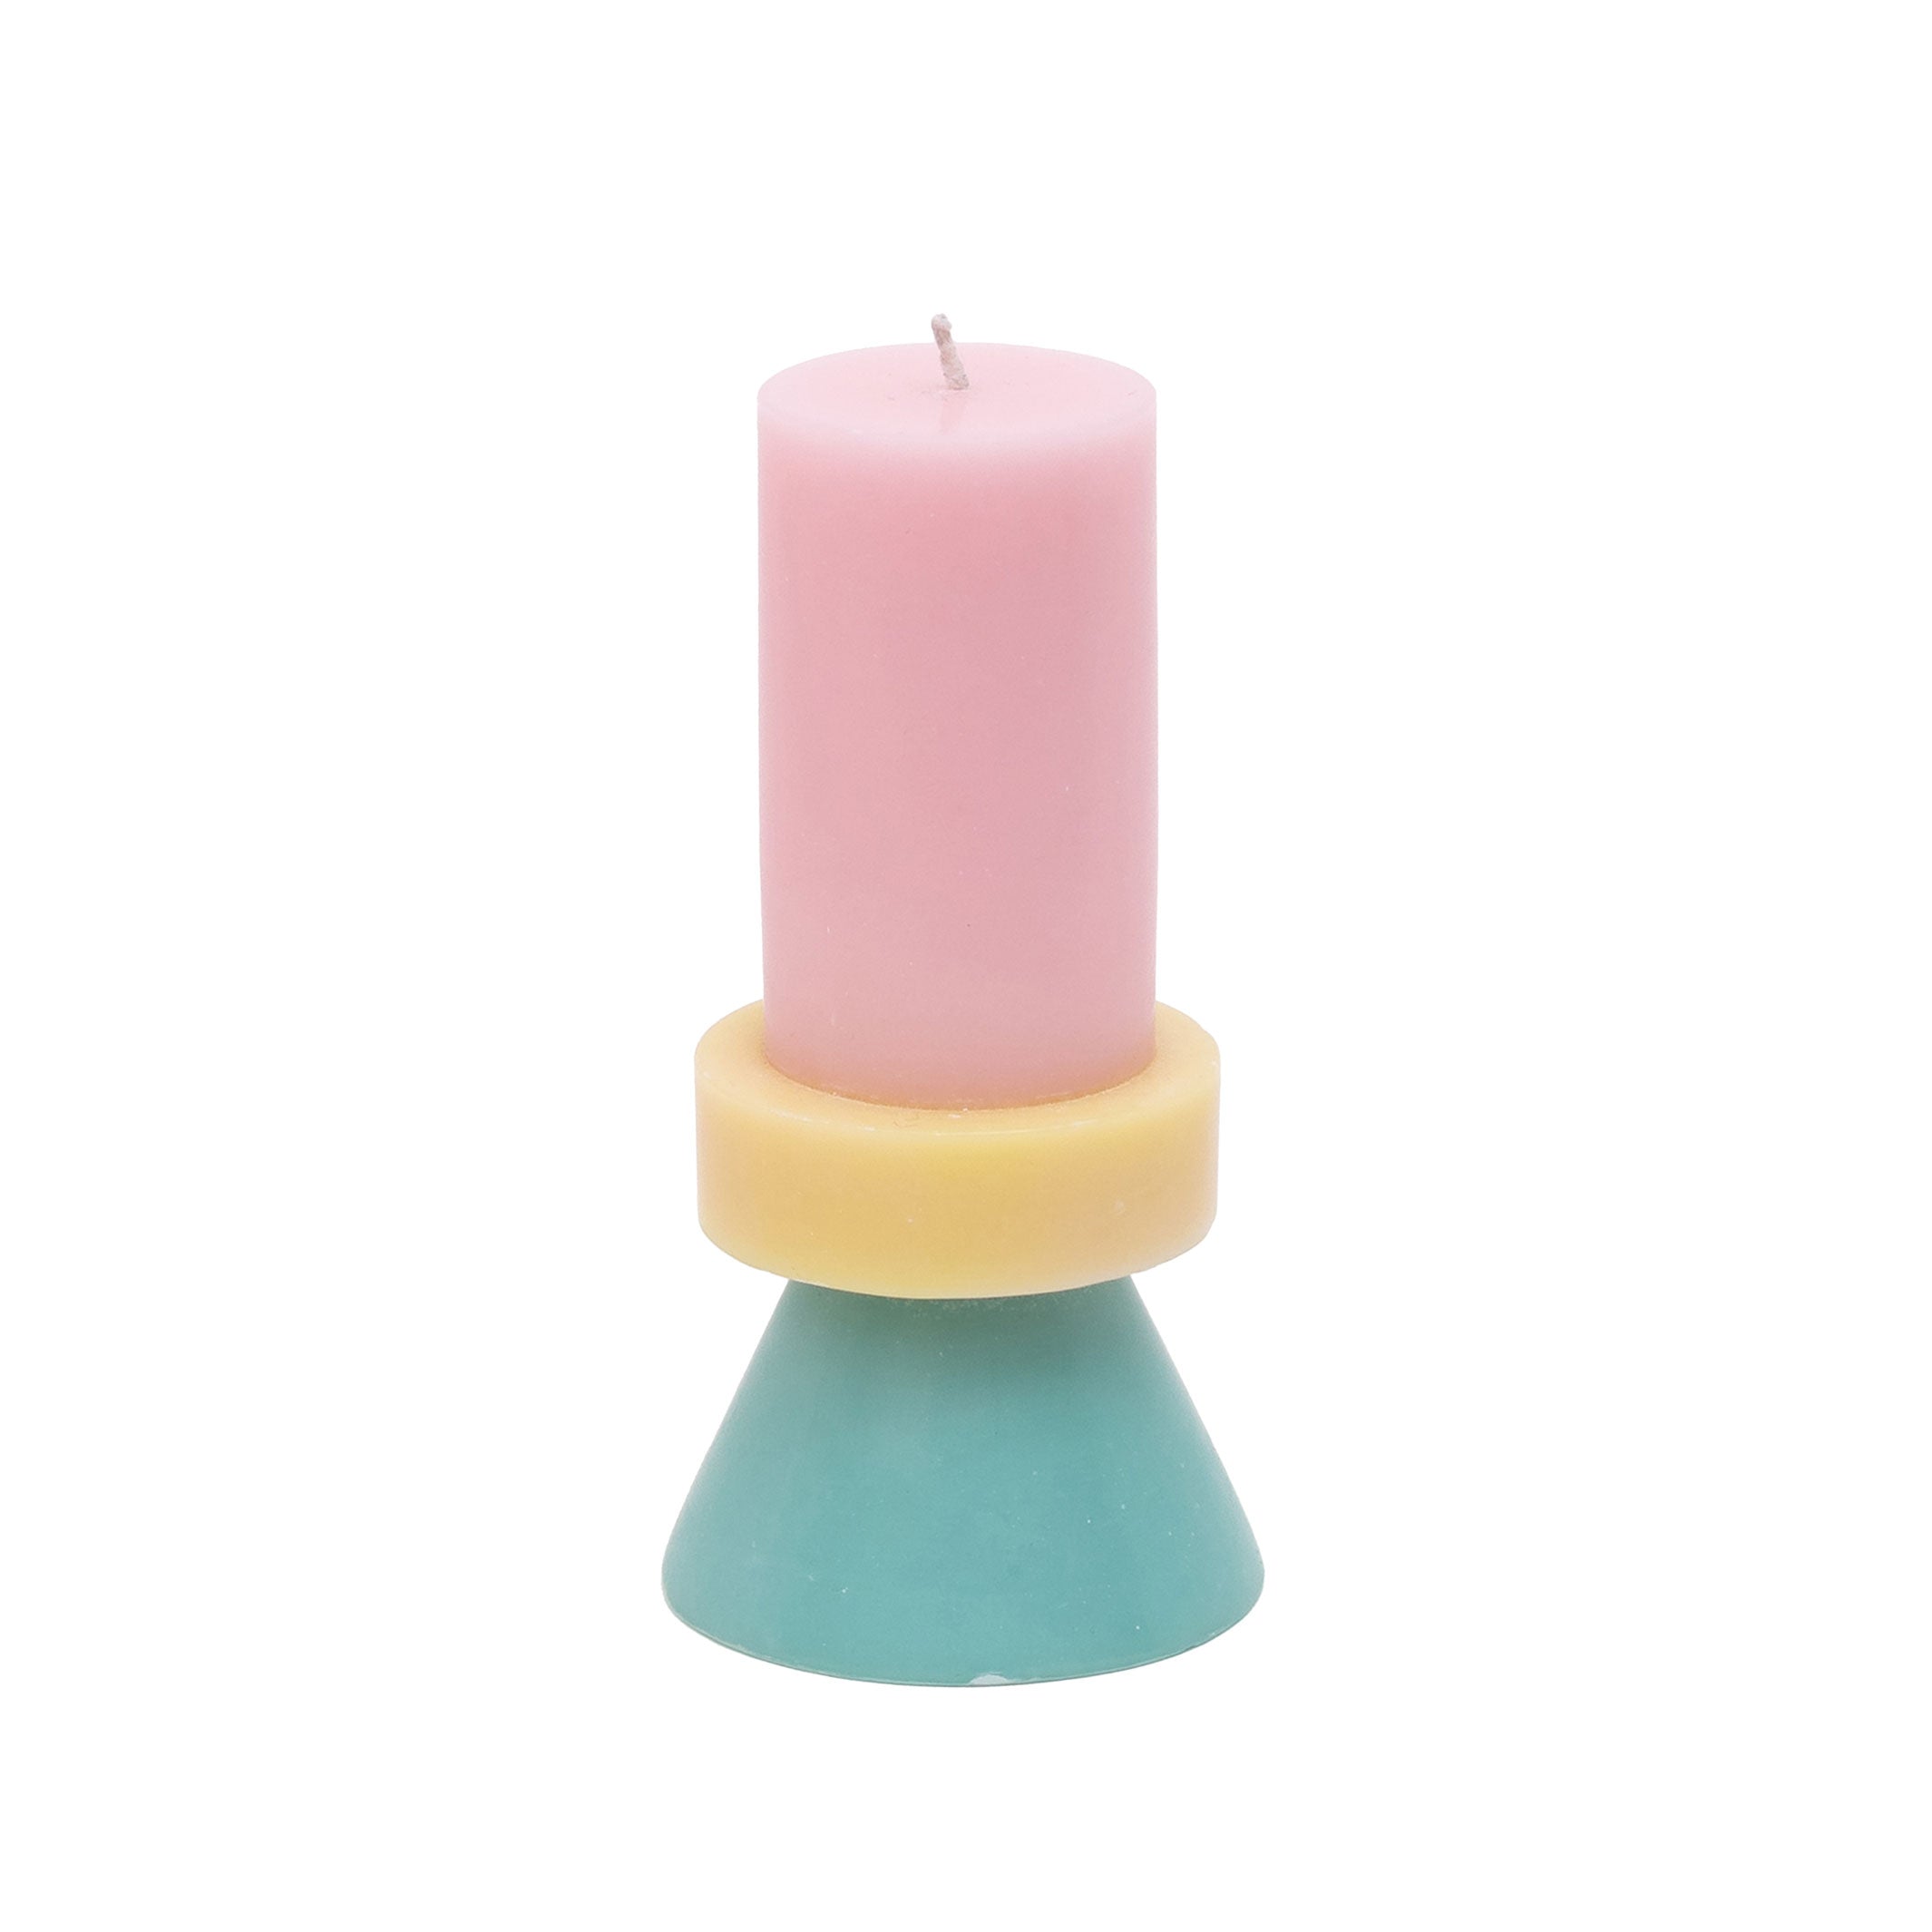 STACK CANDLE TALL | Colors flosspink-paleyellow-mint | 30 hrs. burning time | YOD AND CO